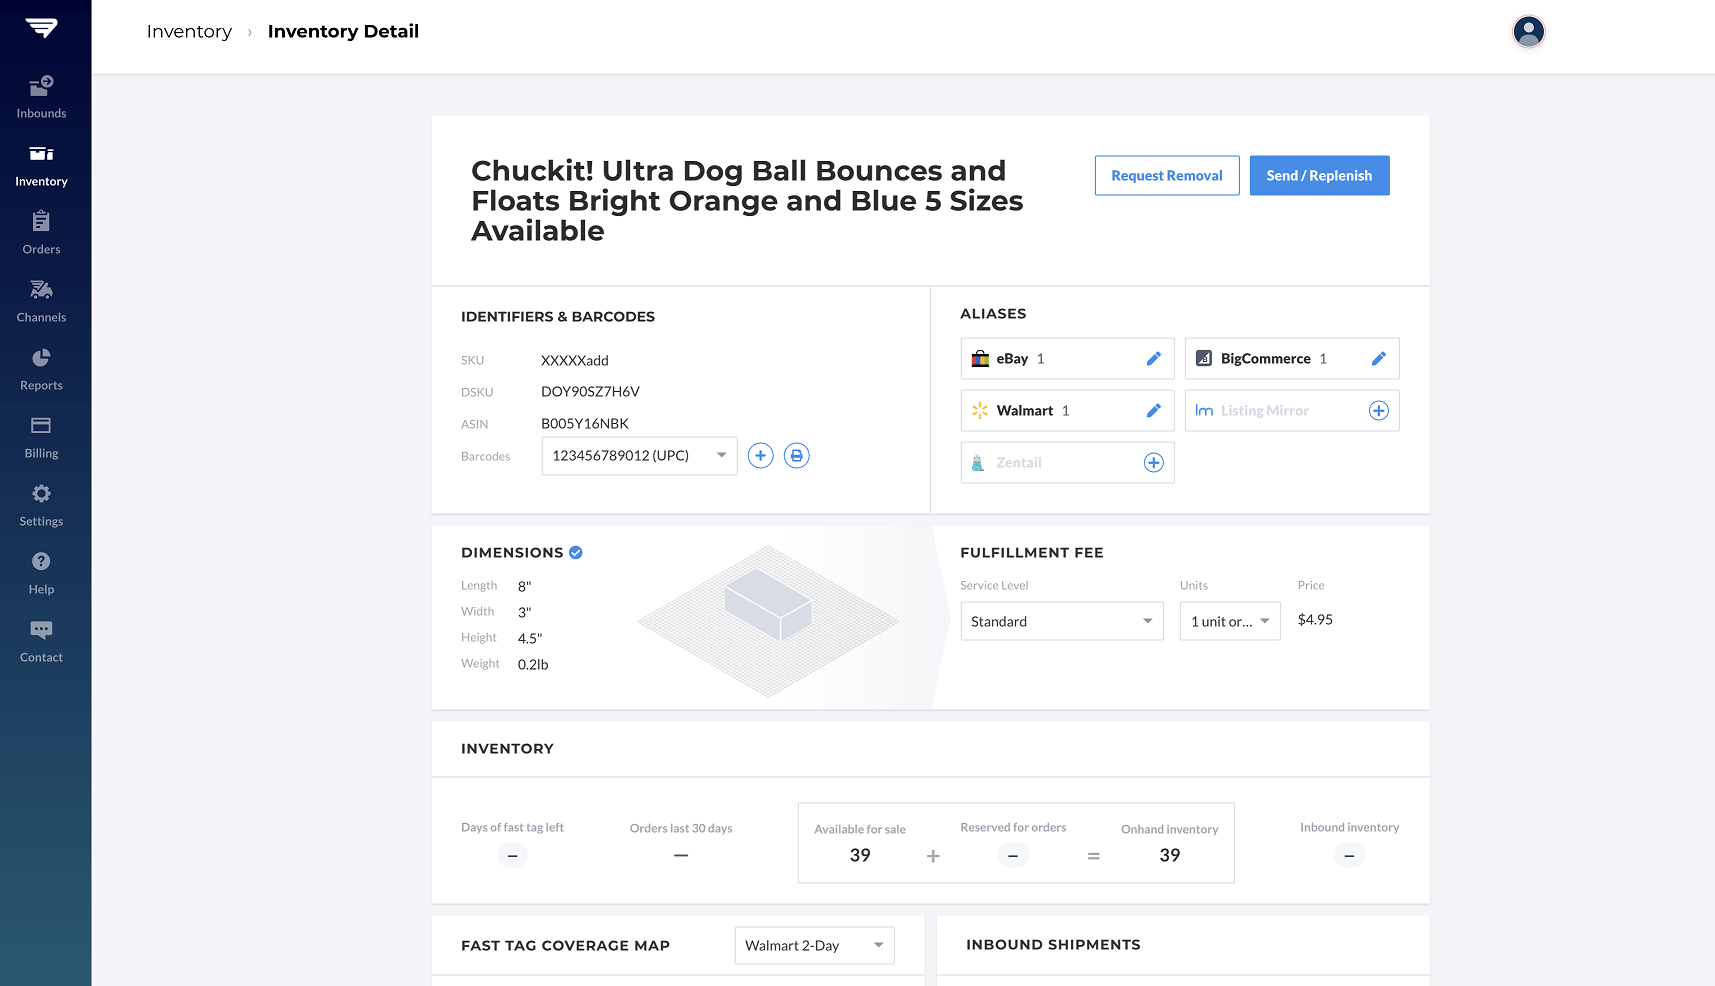 BigCommerce: inventory detail